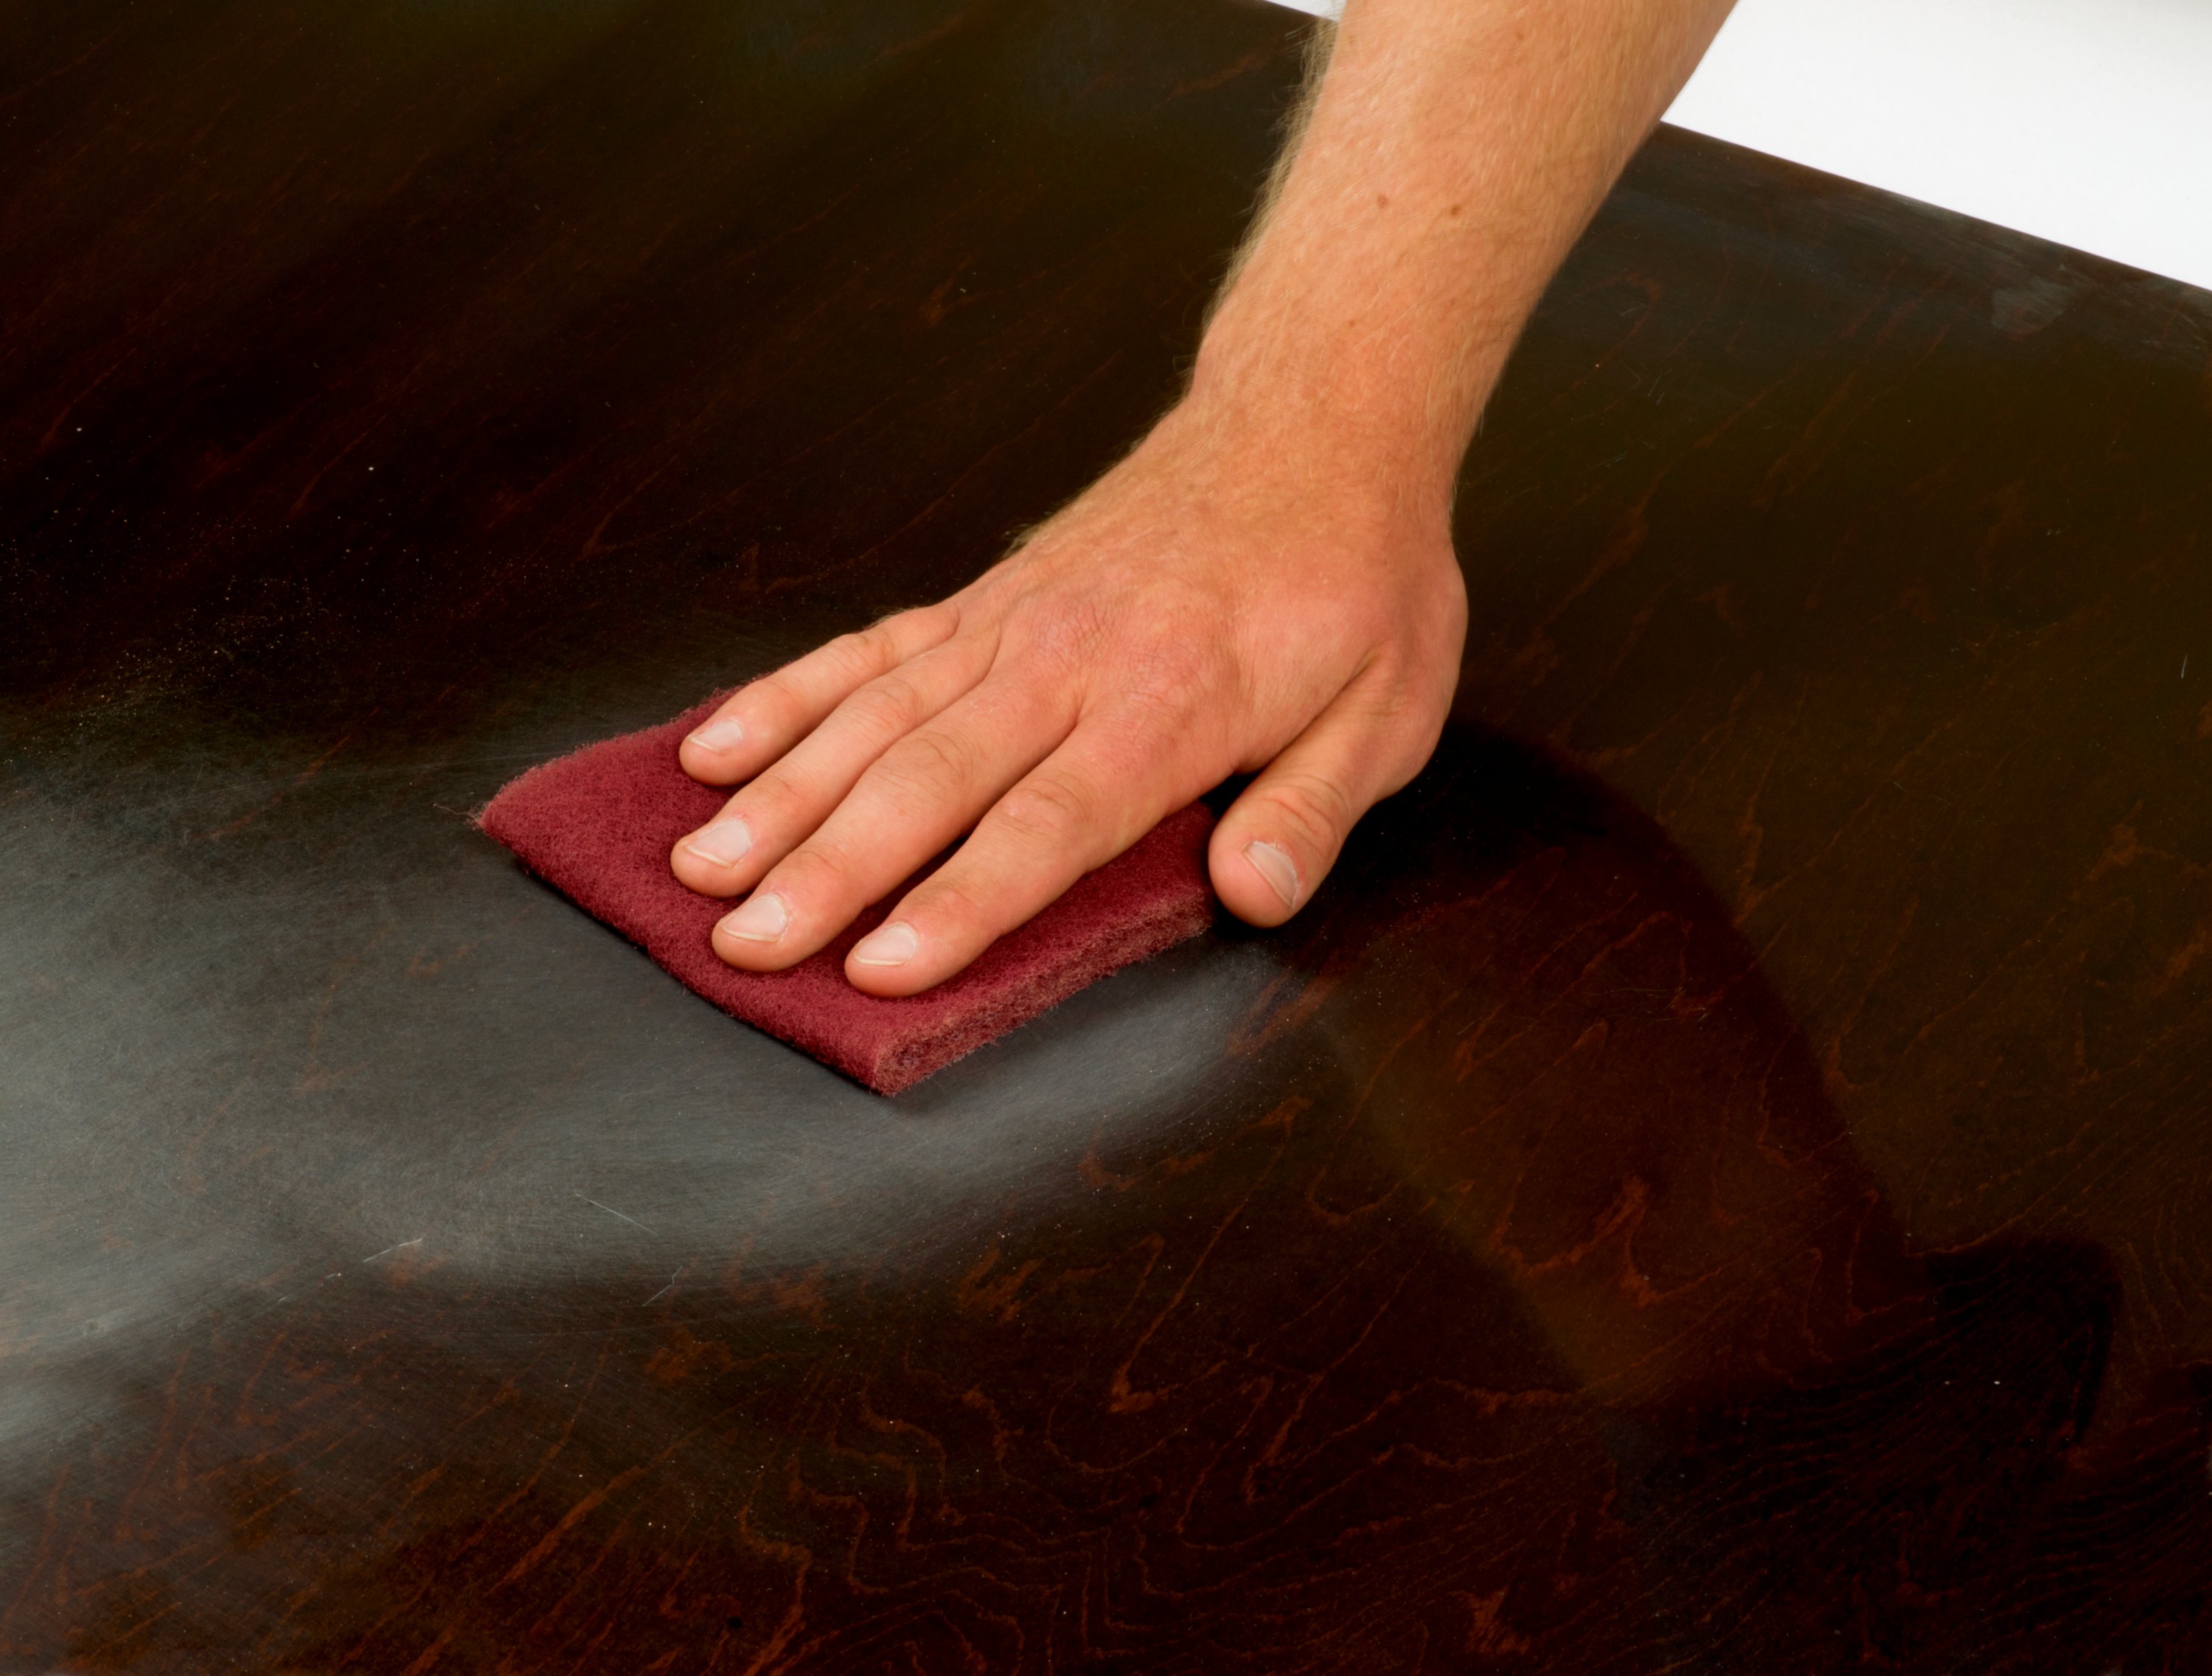 Our abrasive material creates a smooth, clean finish.